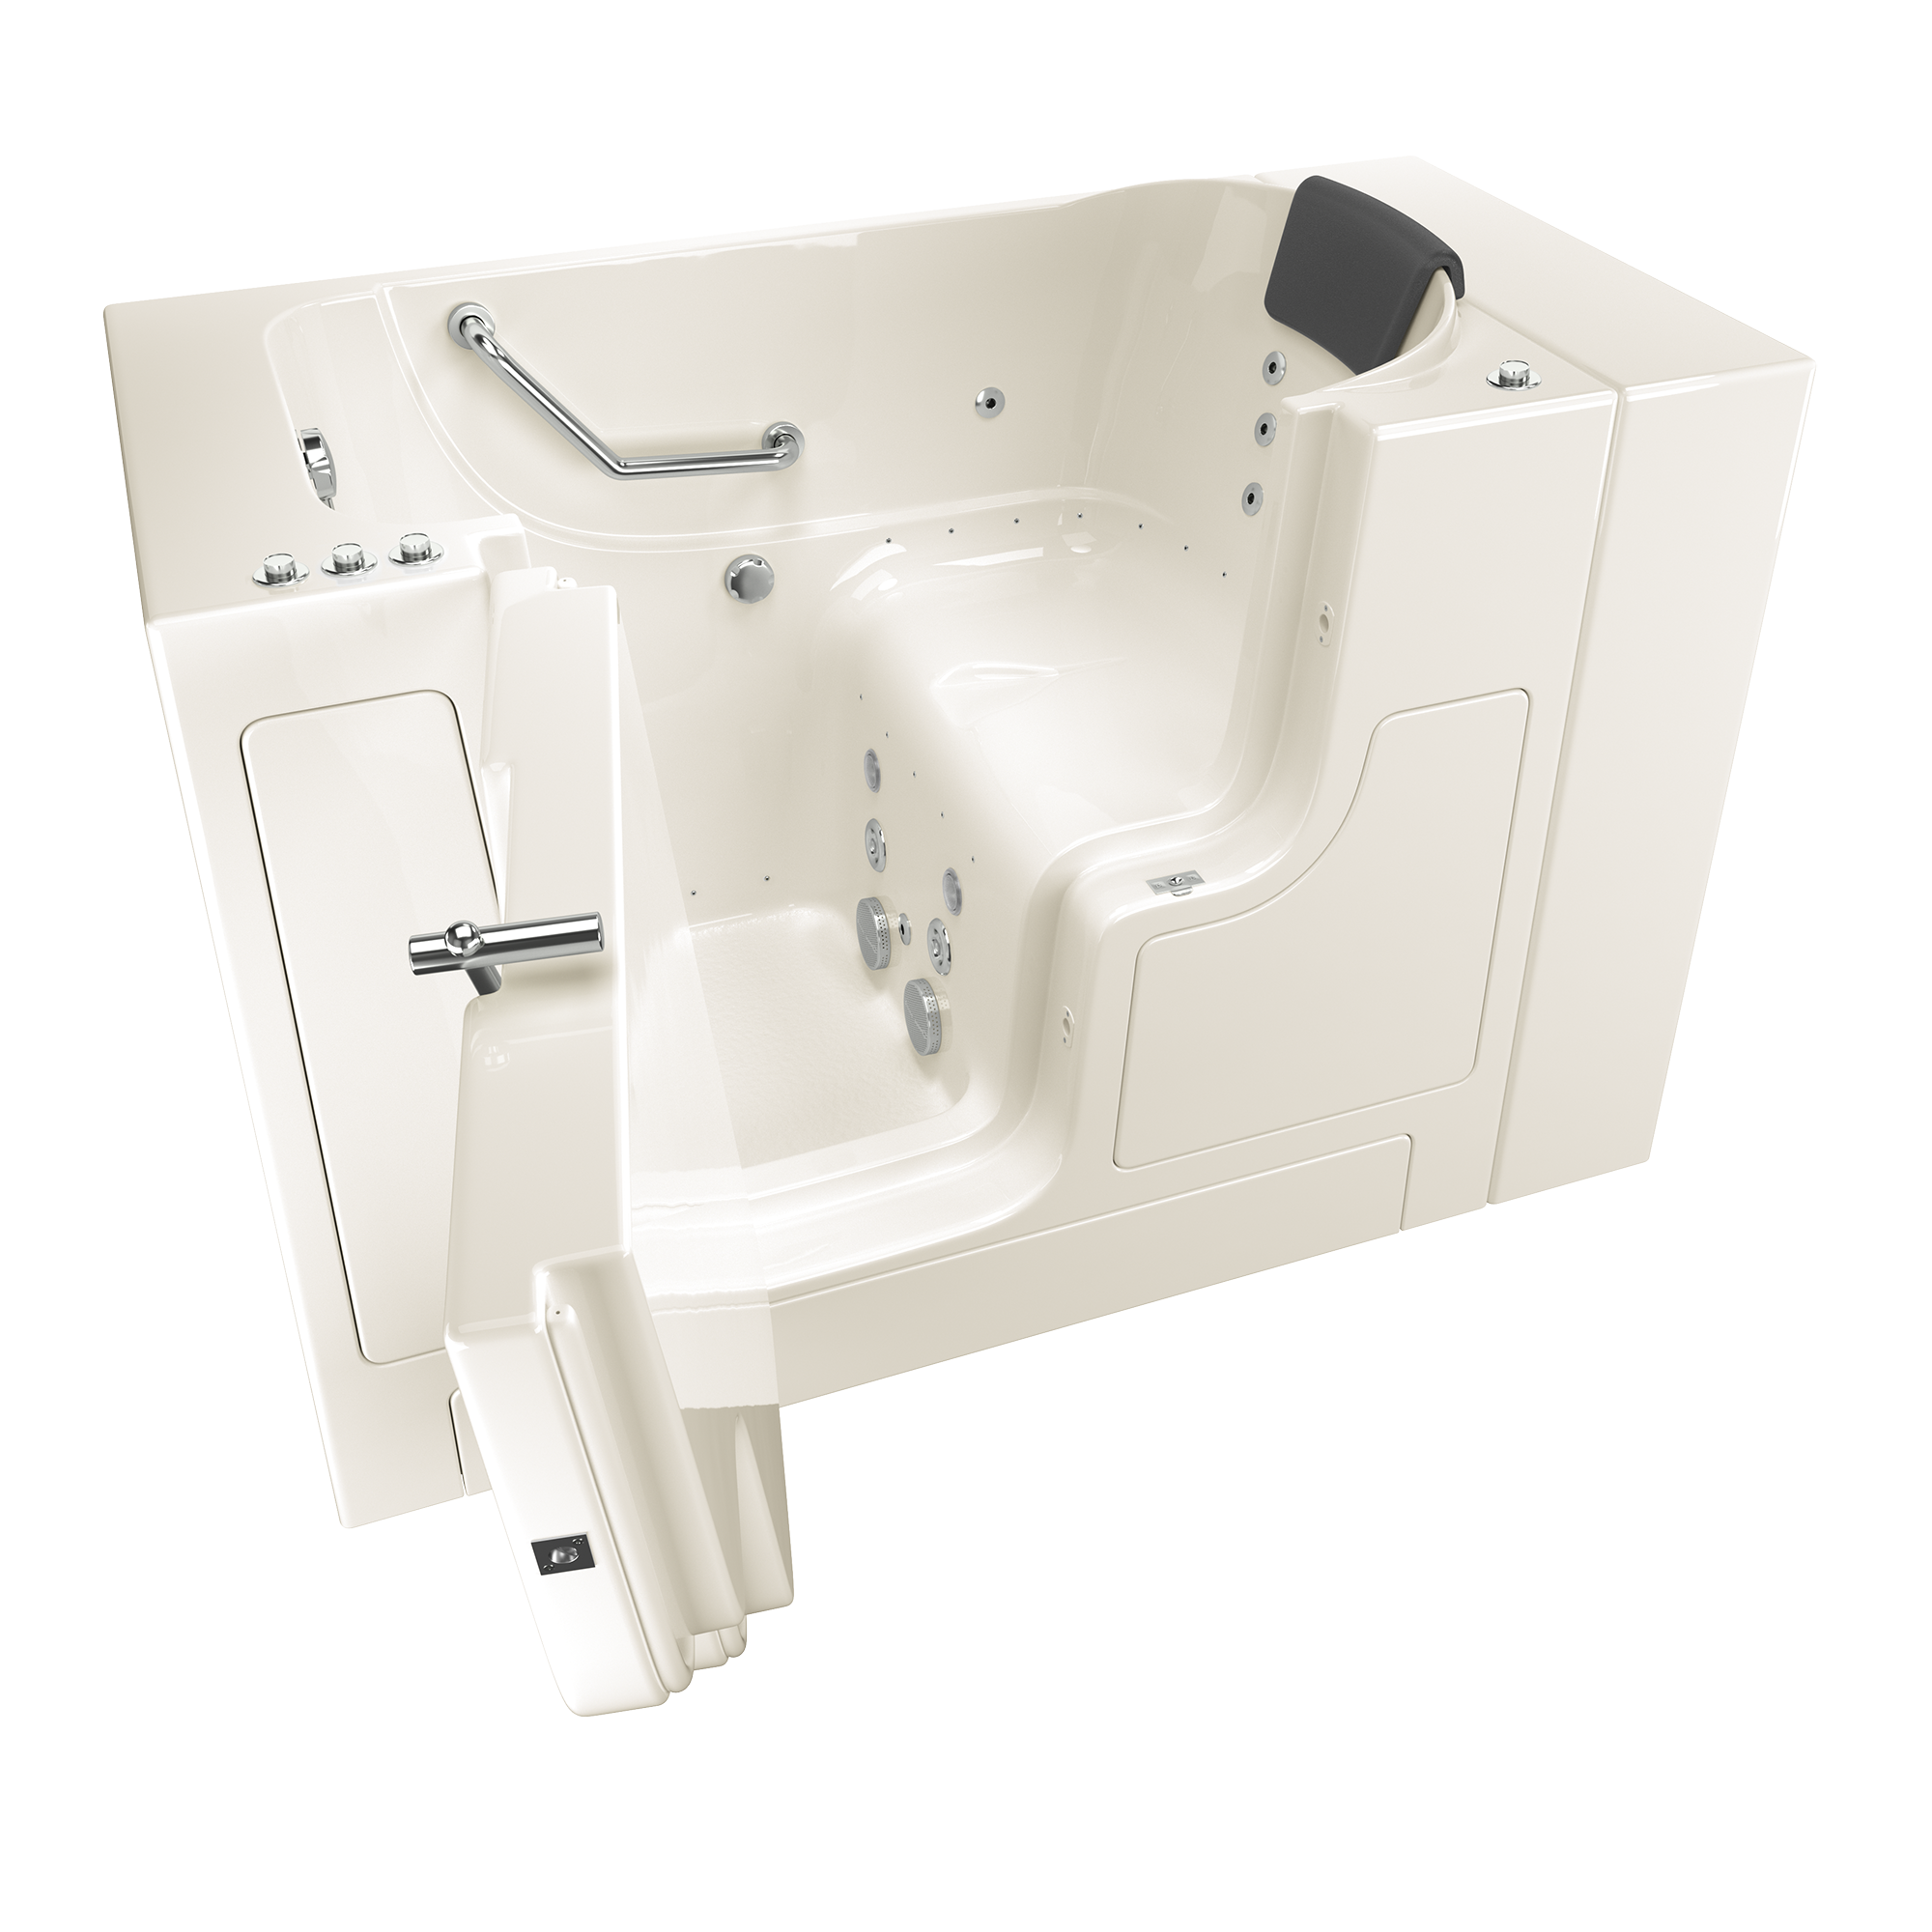 Gelcoat Premium Series 30 x 52 -Inch Walk-in Tub With Combination Air Spa and Whirlpool Systems - Left-Hand Drain